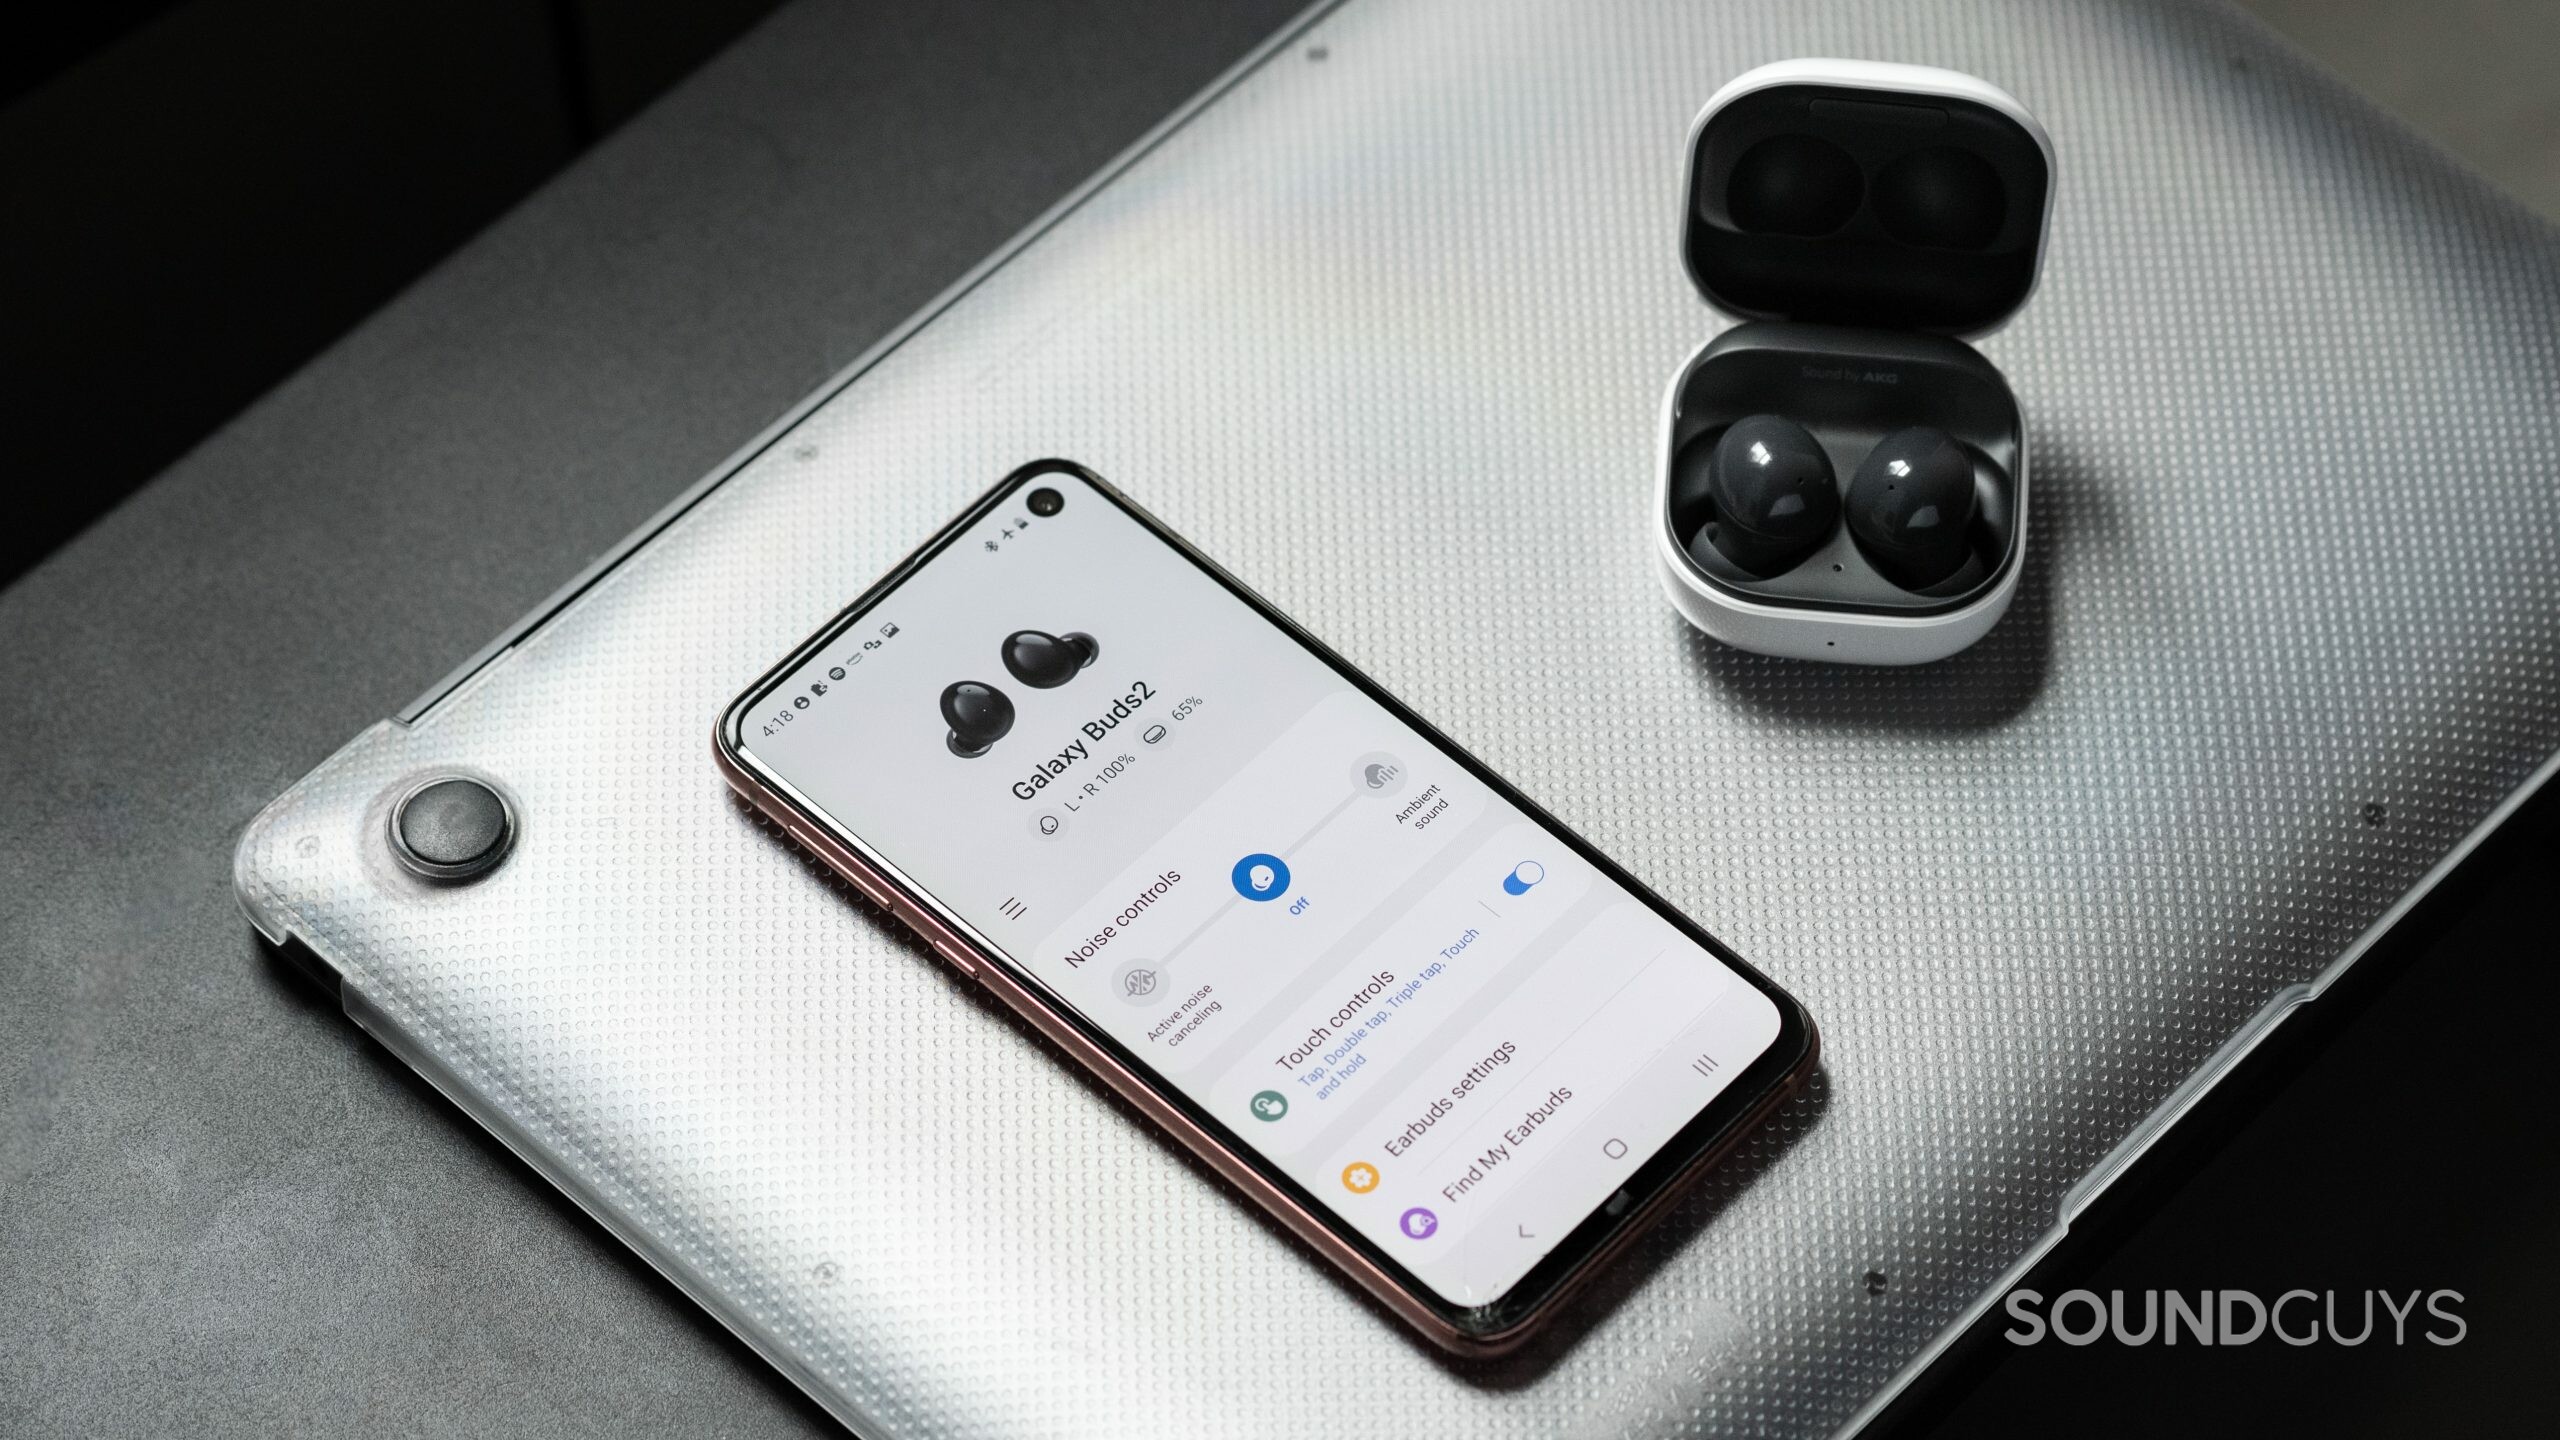 The Samsung Galaxy Buds 2 noise canceling true wireless earbuds in the open charging case while connected to the Galaxy Wearable app on a Samsung Galaxy S10e.